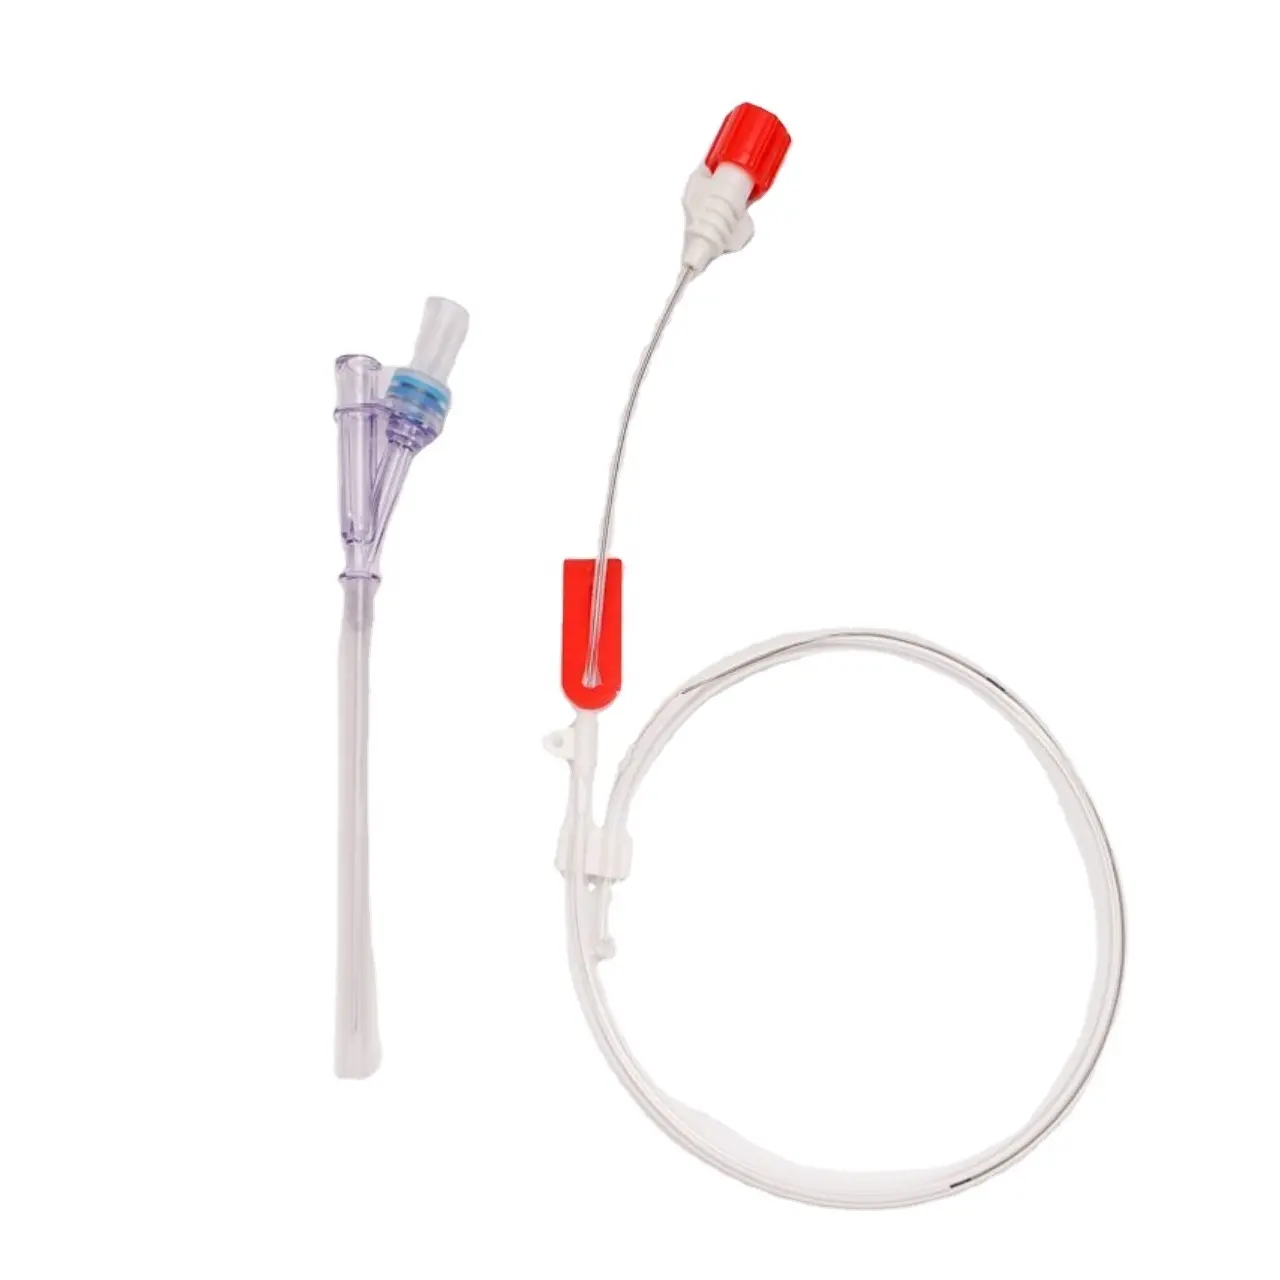 Disposable Medical Supply Anesthesia Arterial Catheter PU AC Kit Pediatric Adult Surgical Catheter Set